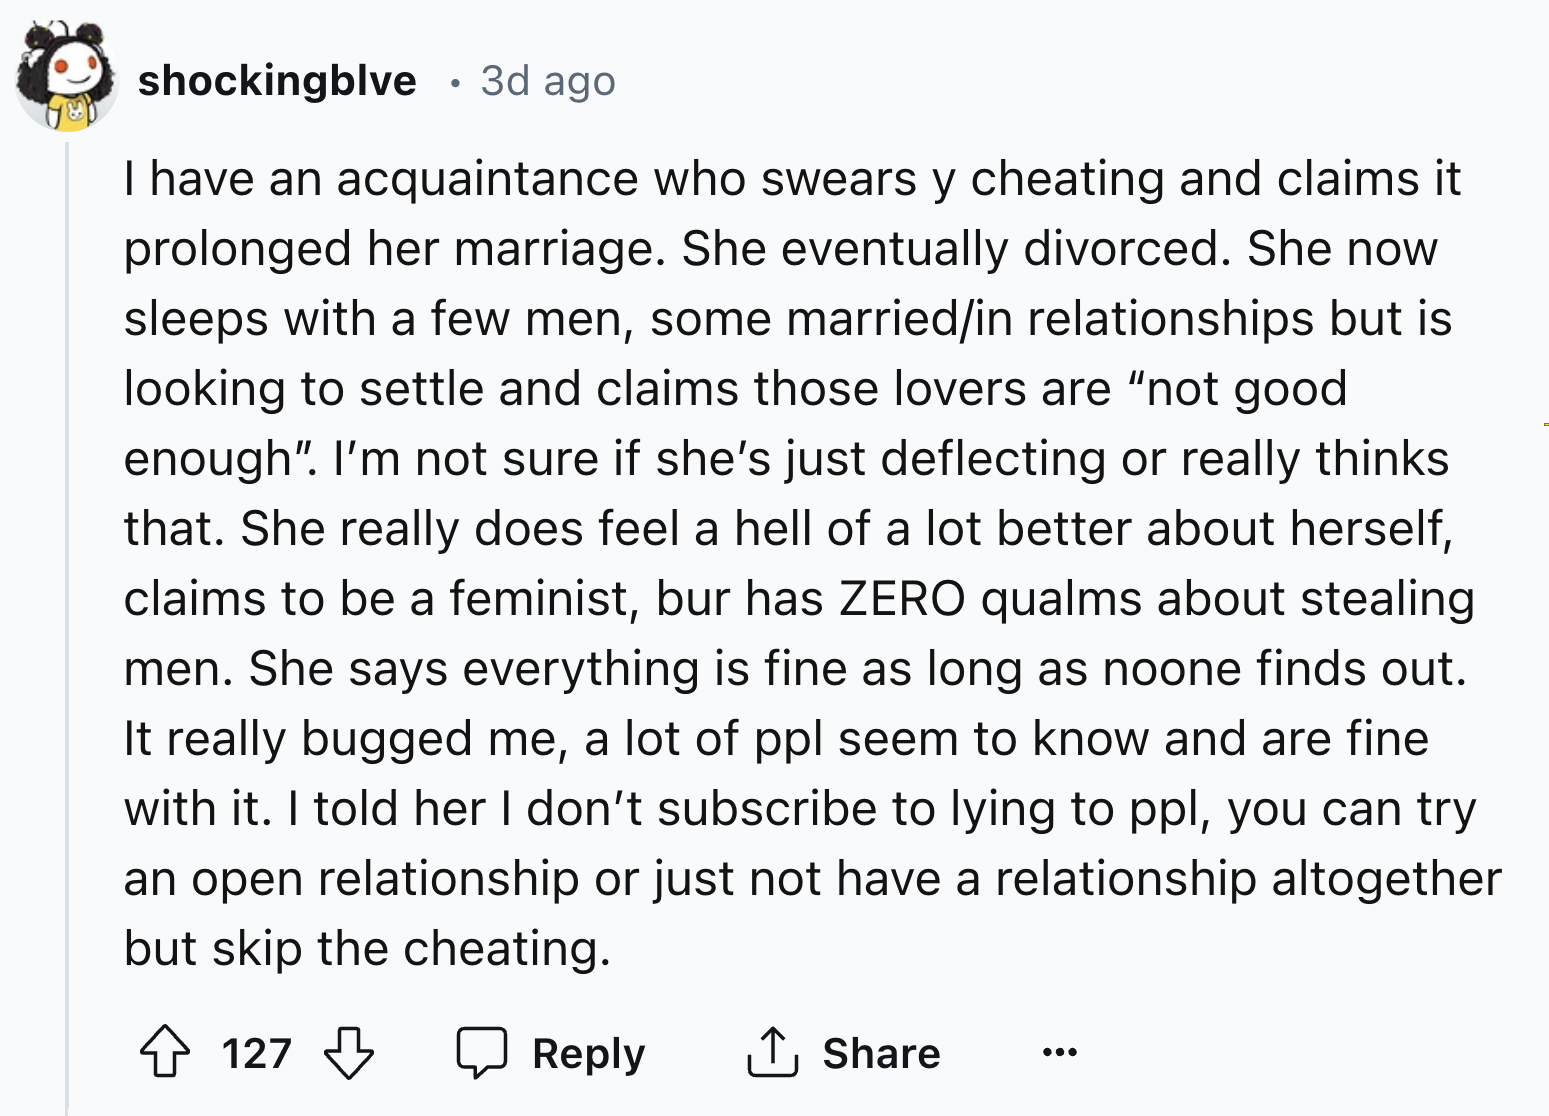 screenshot - shockingblve 3d ago I have an acquaintance who swears y cheating and claims it prolonged her marriage. She eventually divorced. She now sleeps with a few men, some marriedin relationships but is looking to settle and claims those lovers are "